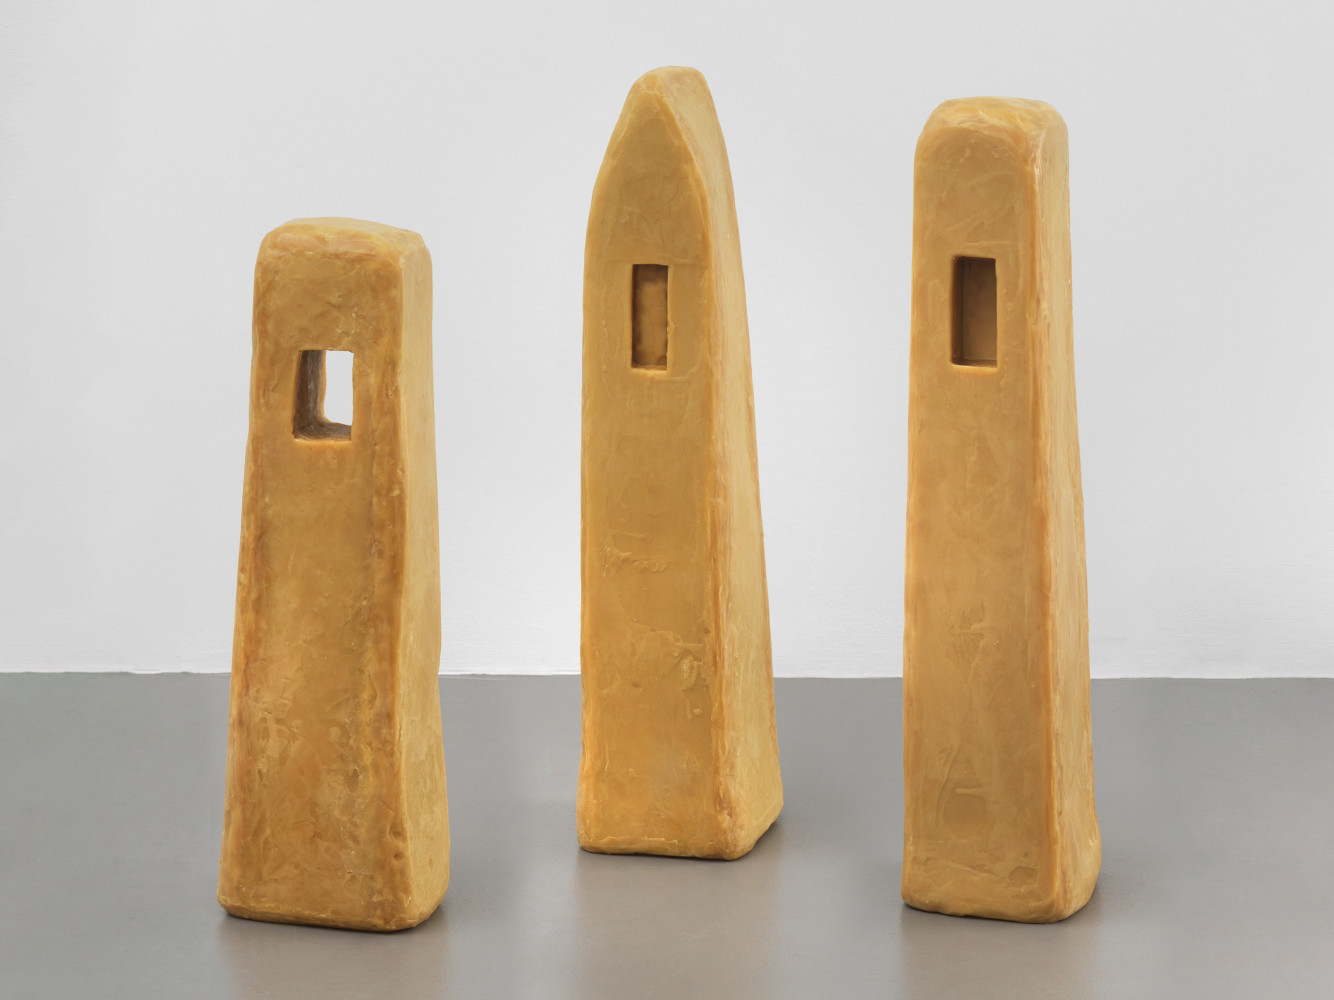 Wolfgang Laib, ‘Towers of Silence’, 2019, Beeswax